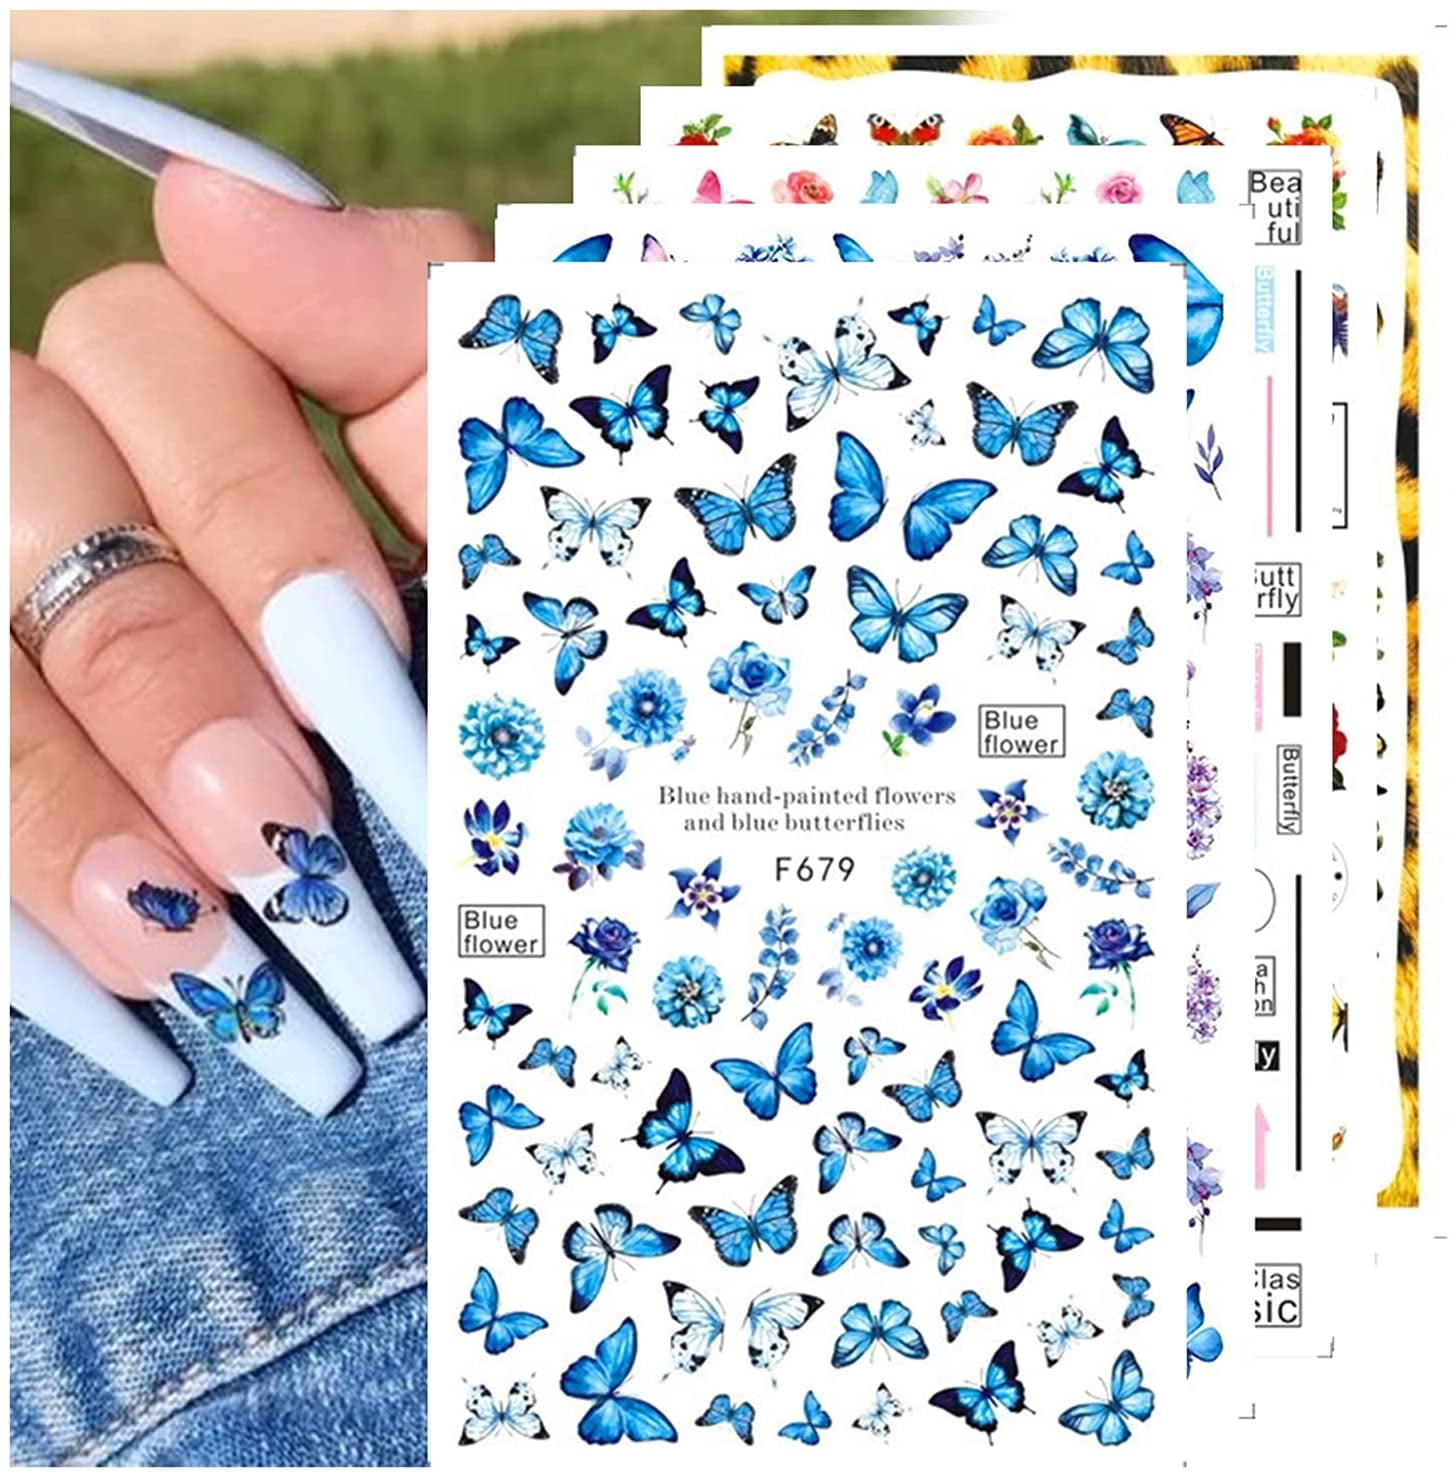 Basic Colors 10 Press on Nails Choose From 66 Colors Any - Etsy | Press on  nails, Girls nail designs, Simple acrylic nails